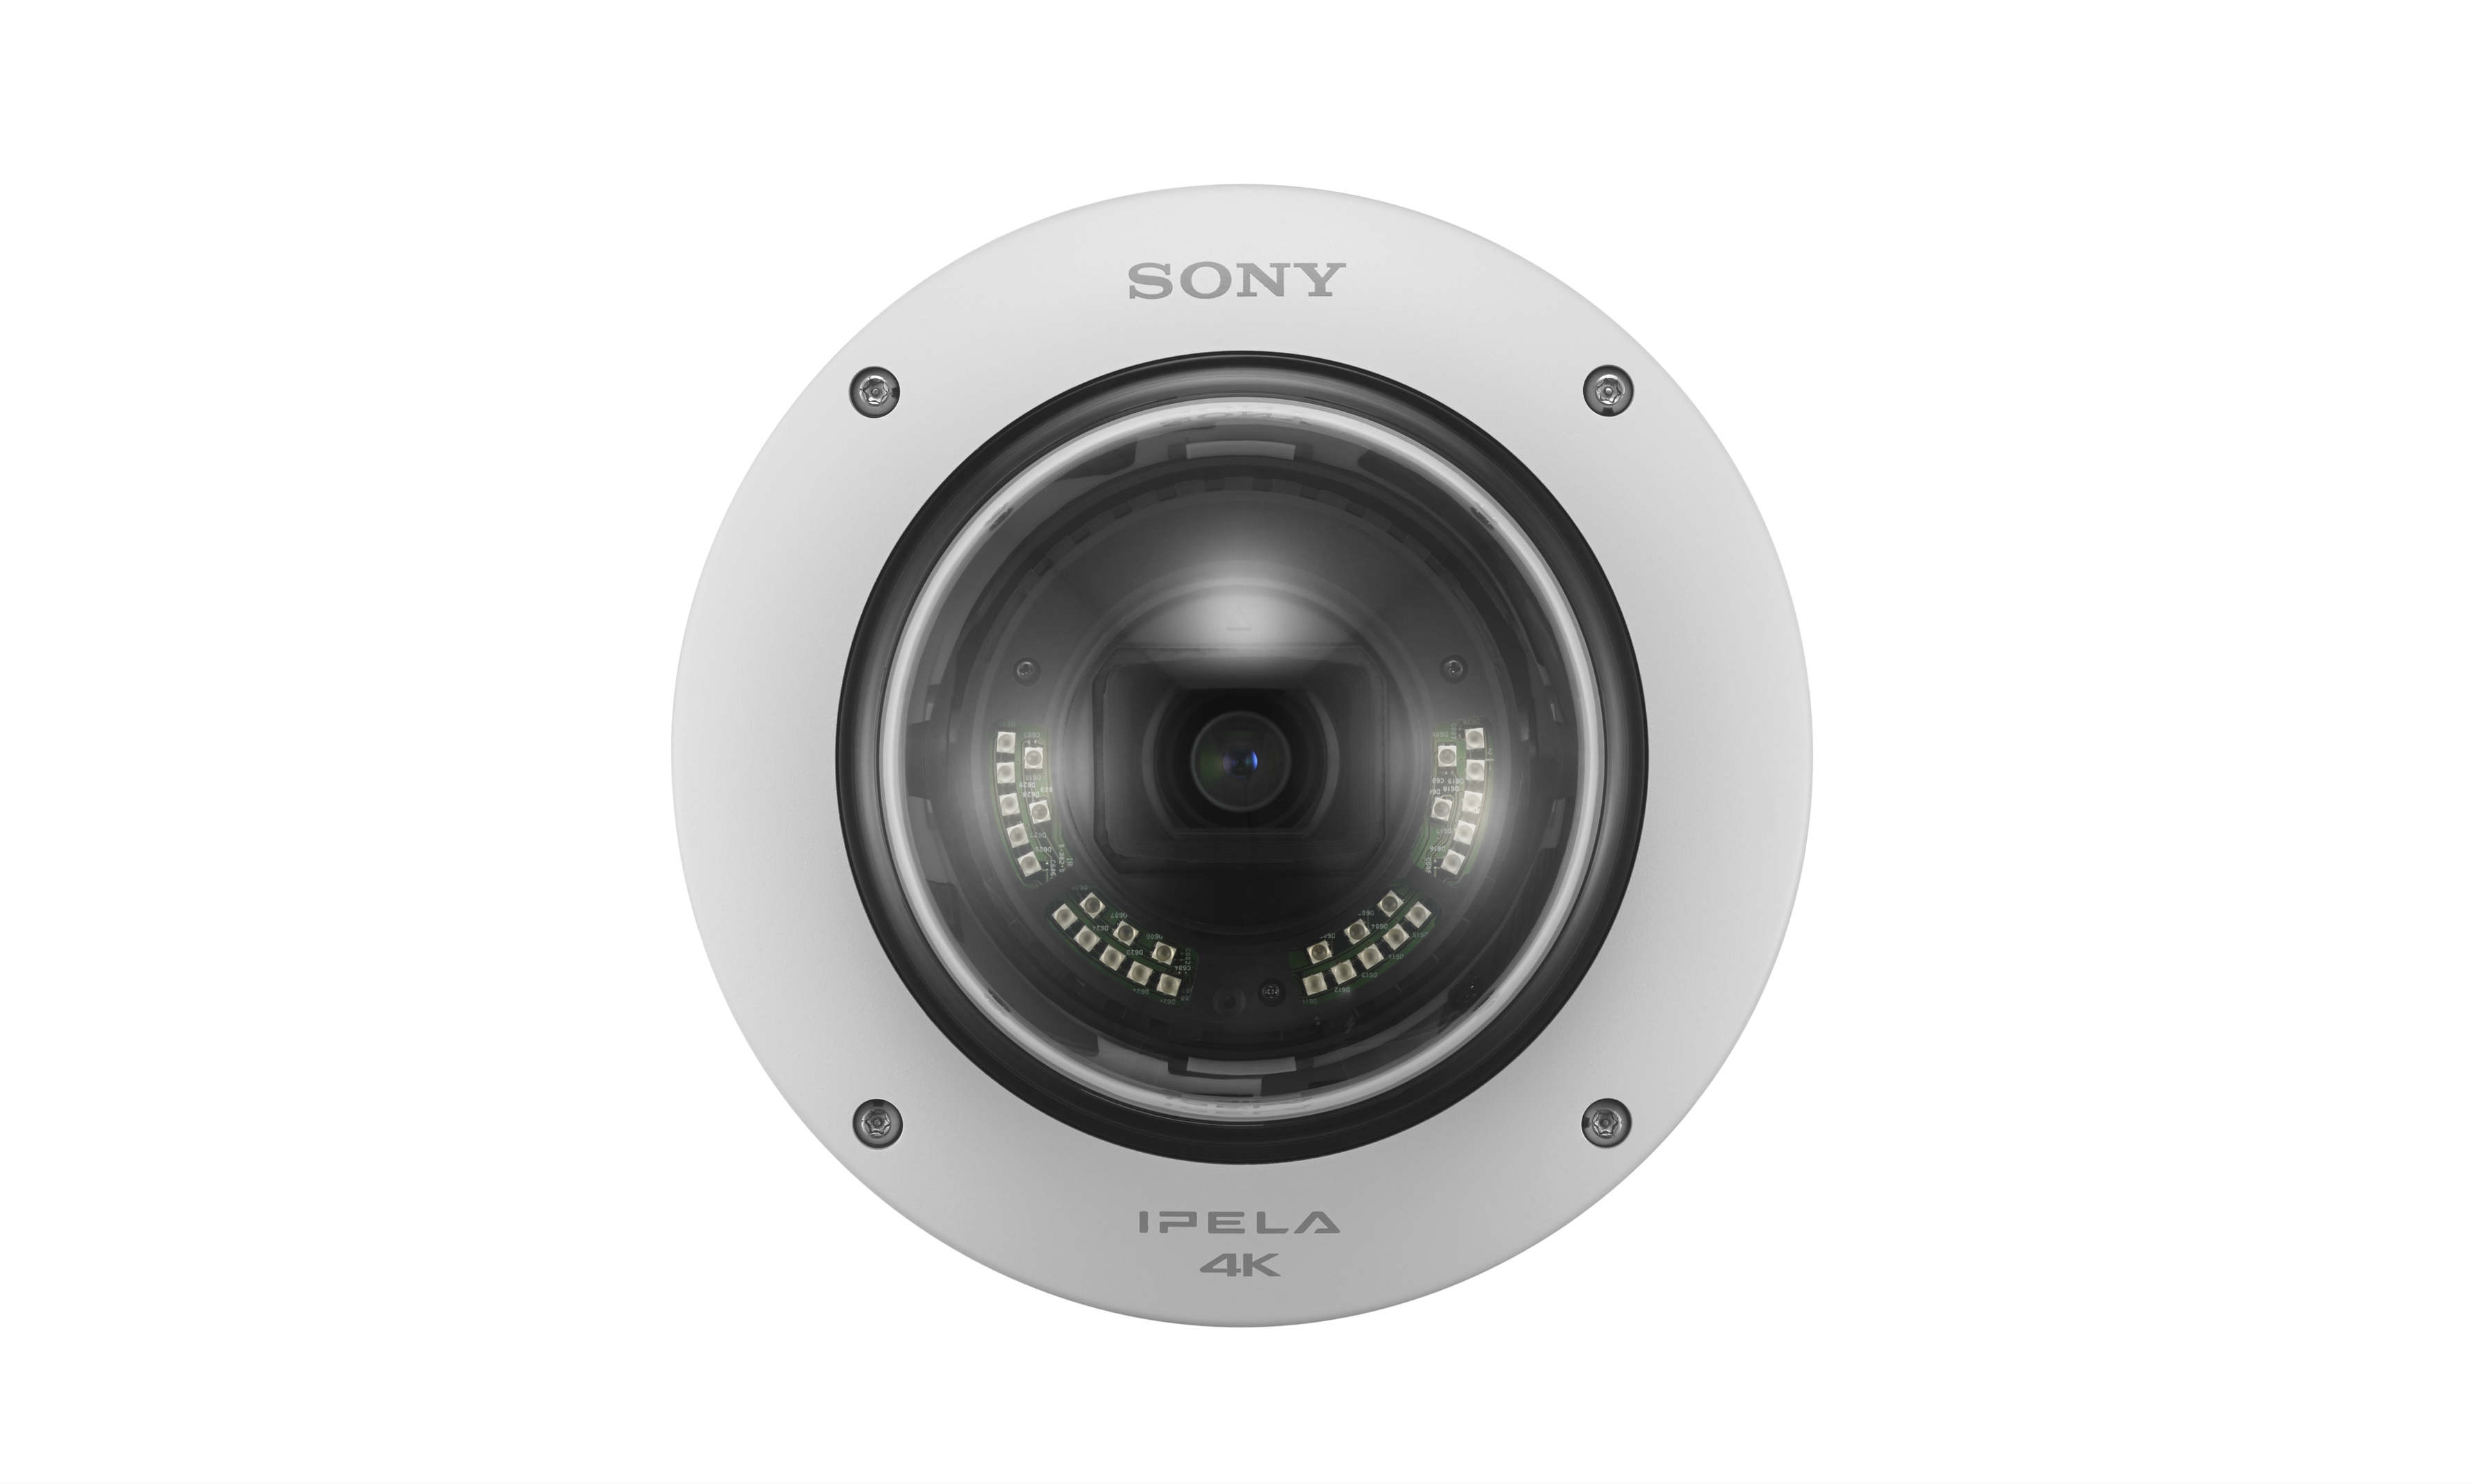 Sony’s 4K Security Camera now available for purchase in Europe